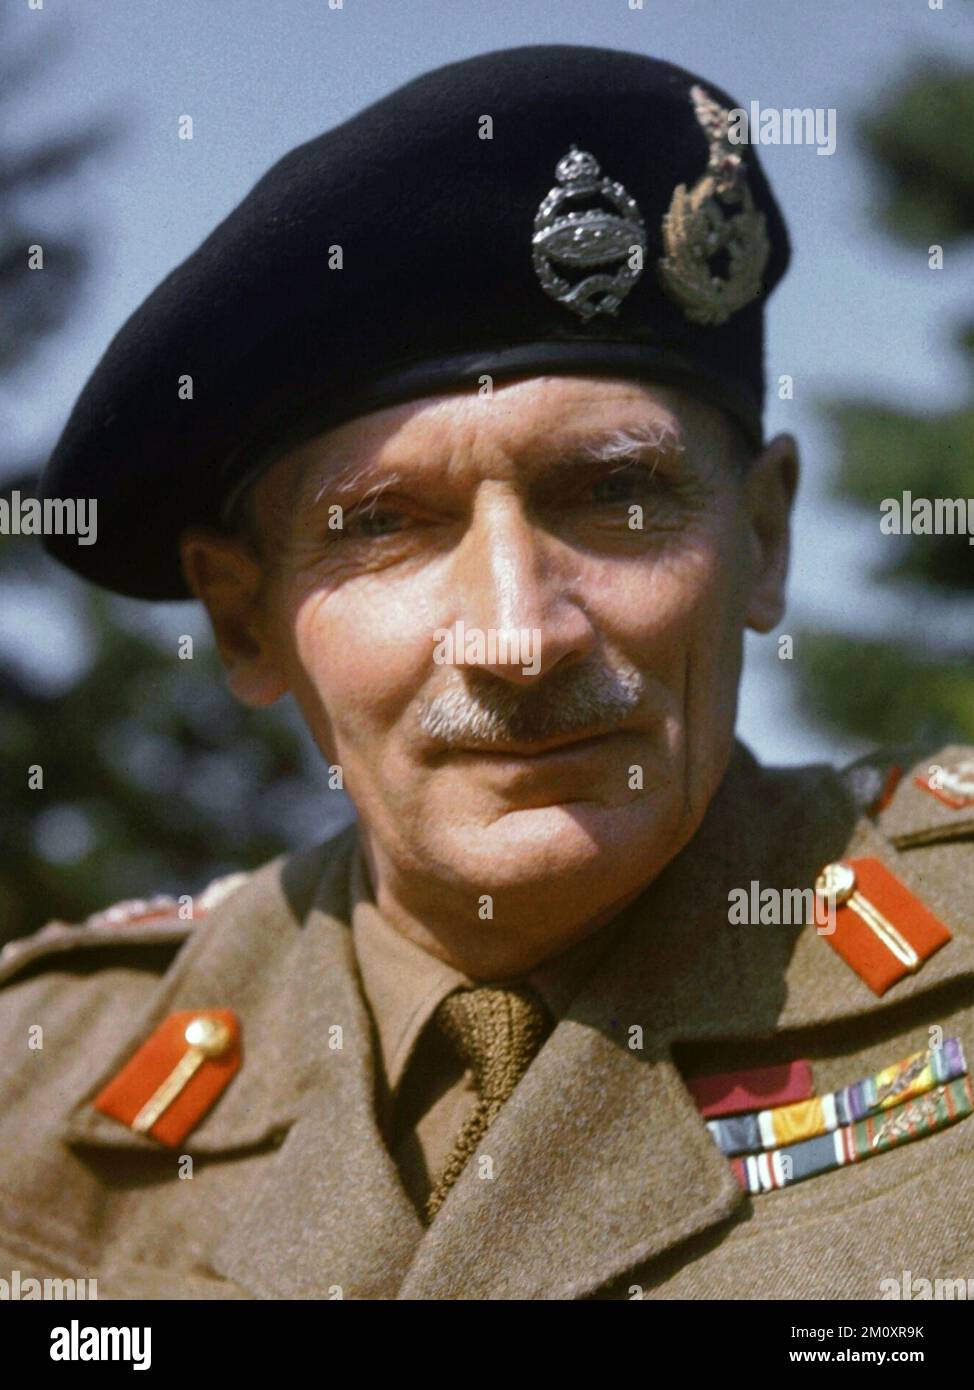 Monty, General Montgomery, General Sir Bernard Montgomery in England, 1943 Portrait of the Commander of the Eighth Army General Sir Bernard Montgomery taken during a visit to England. Field Marshal Bernard Law Montgomery, 1st Viscount Montgomery of Alamein, (1887 – 1976), nicknamed 'Monty', was a senior British Army officer who served in the First World War, the Irish War of Independence and the Second World War. Stock Photo